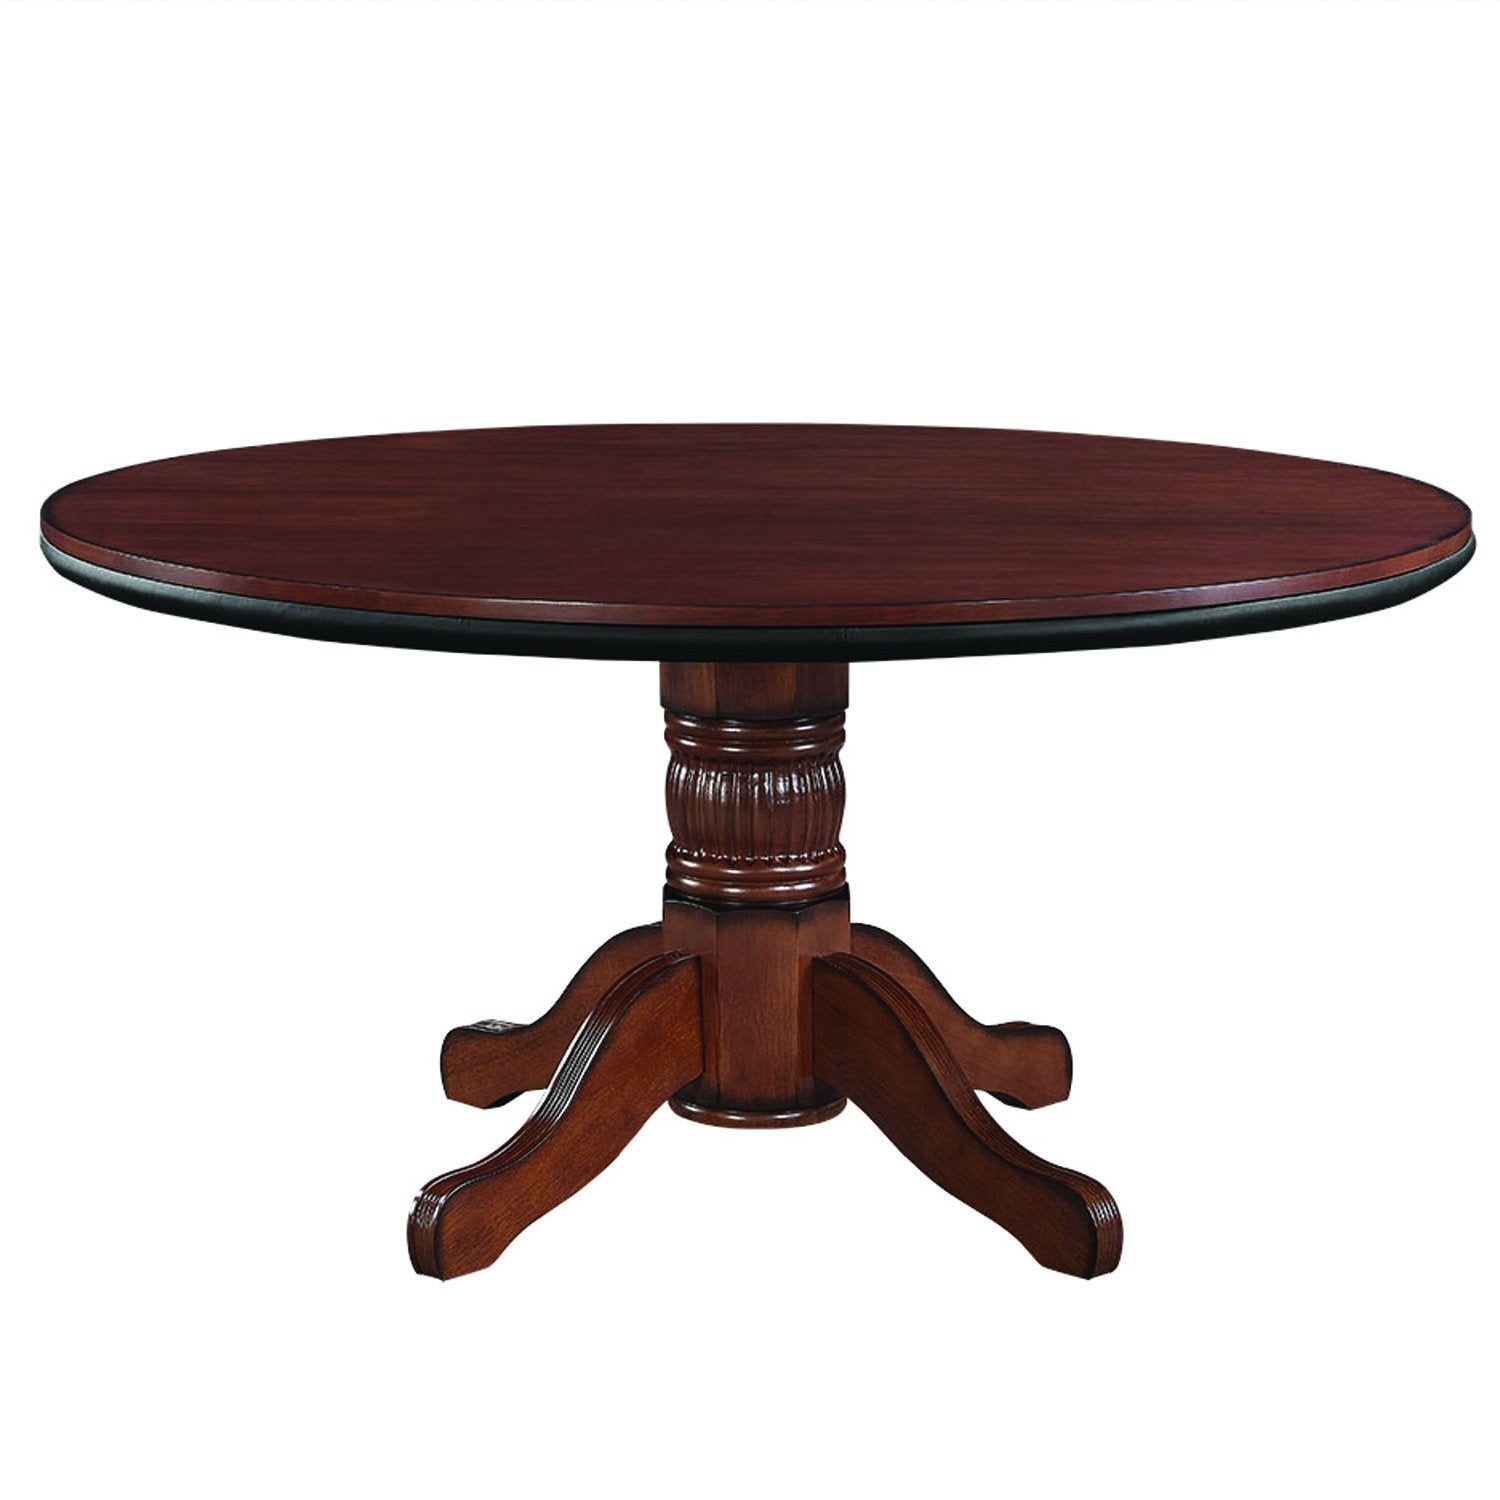 ram game room gtbl60 texas holdem game table with dining top Chestnut dining setup